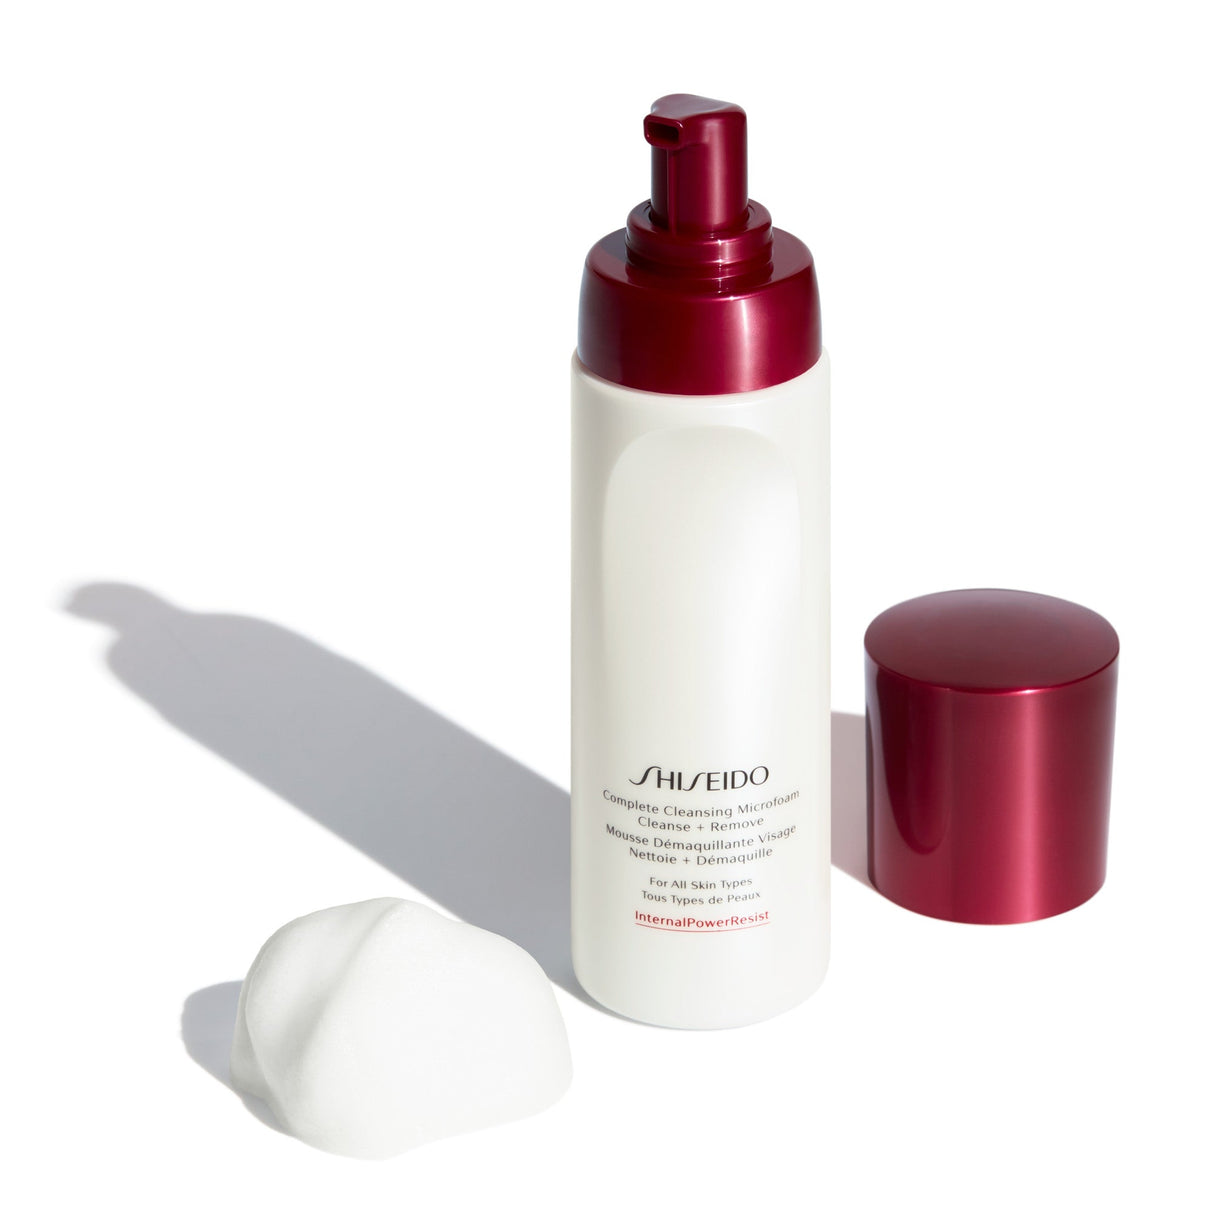 Complete Cleansing Microfoam-Shiseido